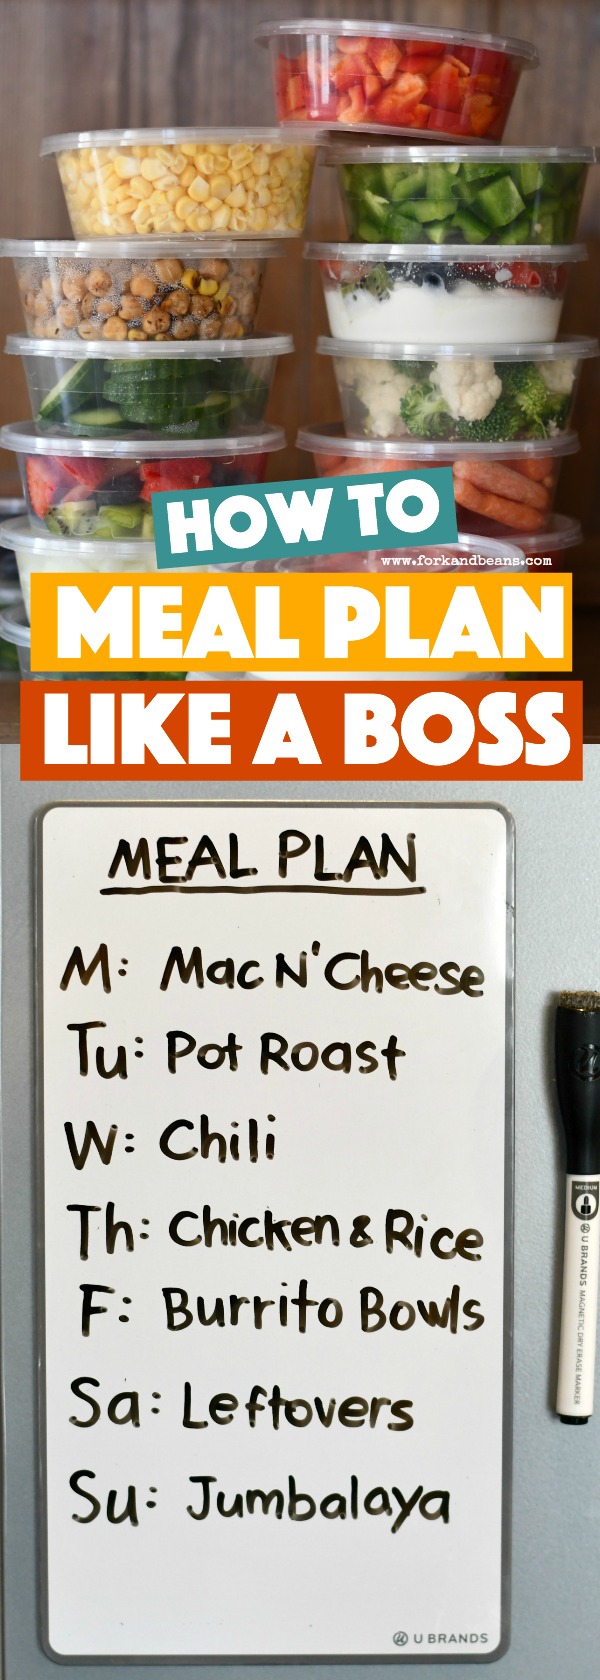 How to Meal Plan Like a Boss